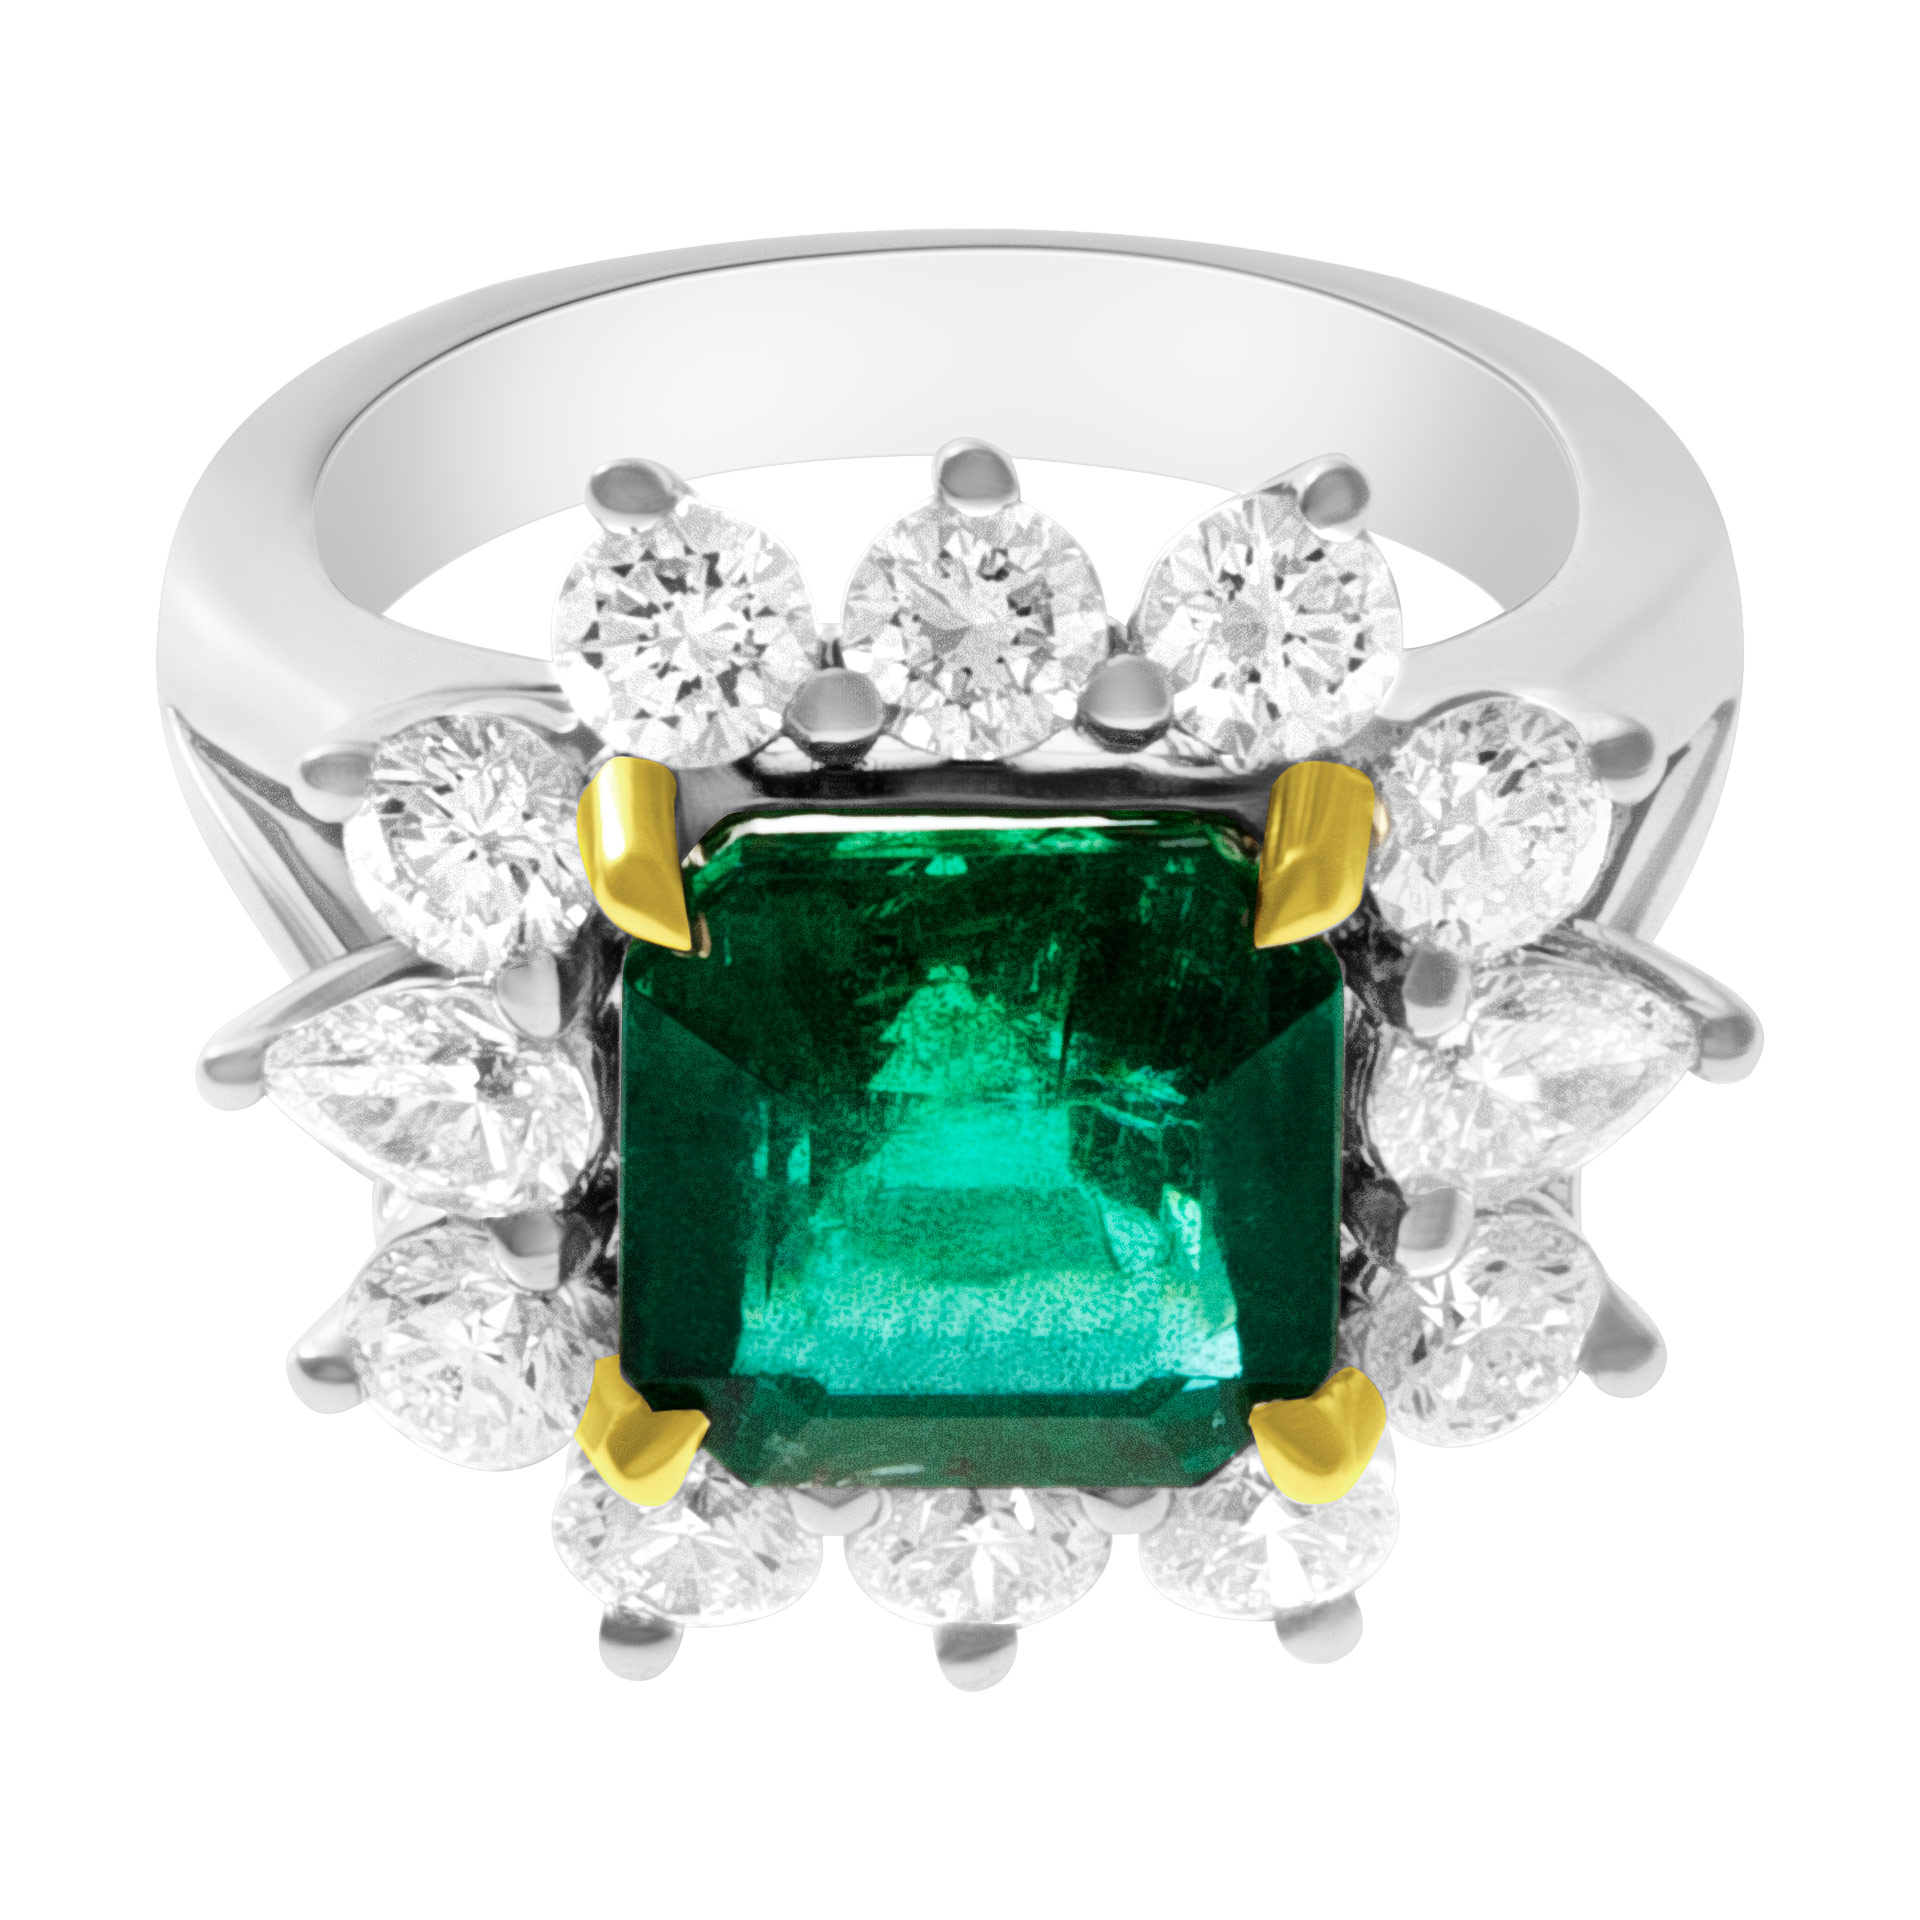 Luxurious deep green emerald and diamond ring 4.85 ct emerald with 2.37 cts in dias